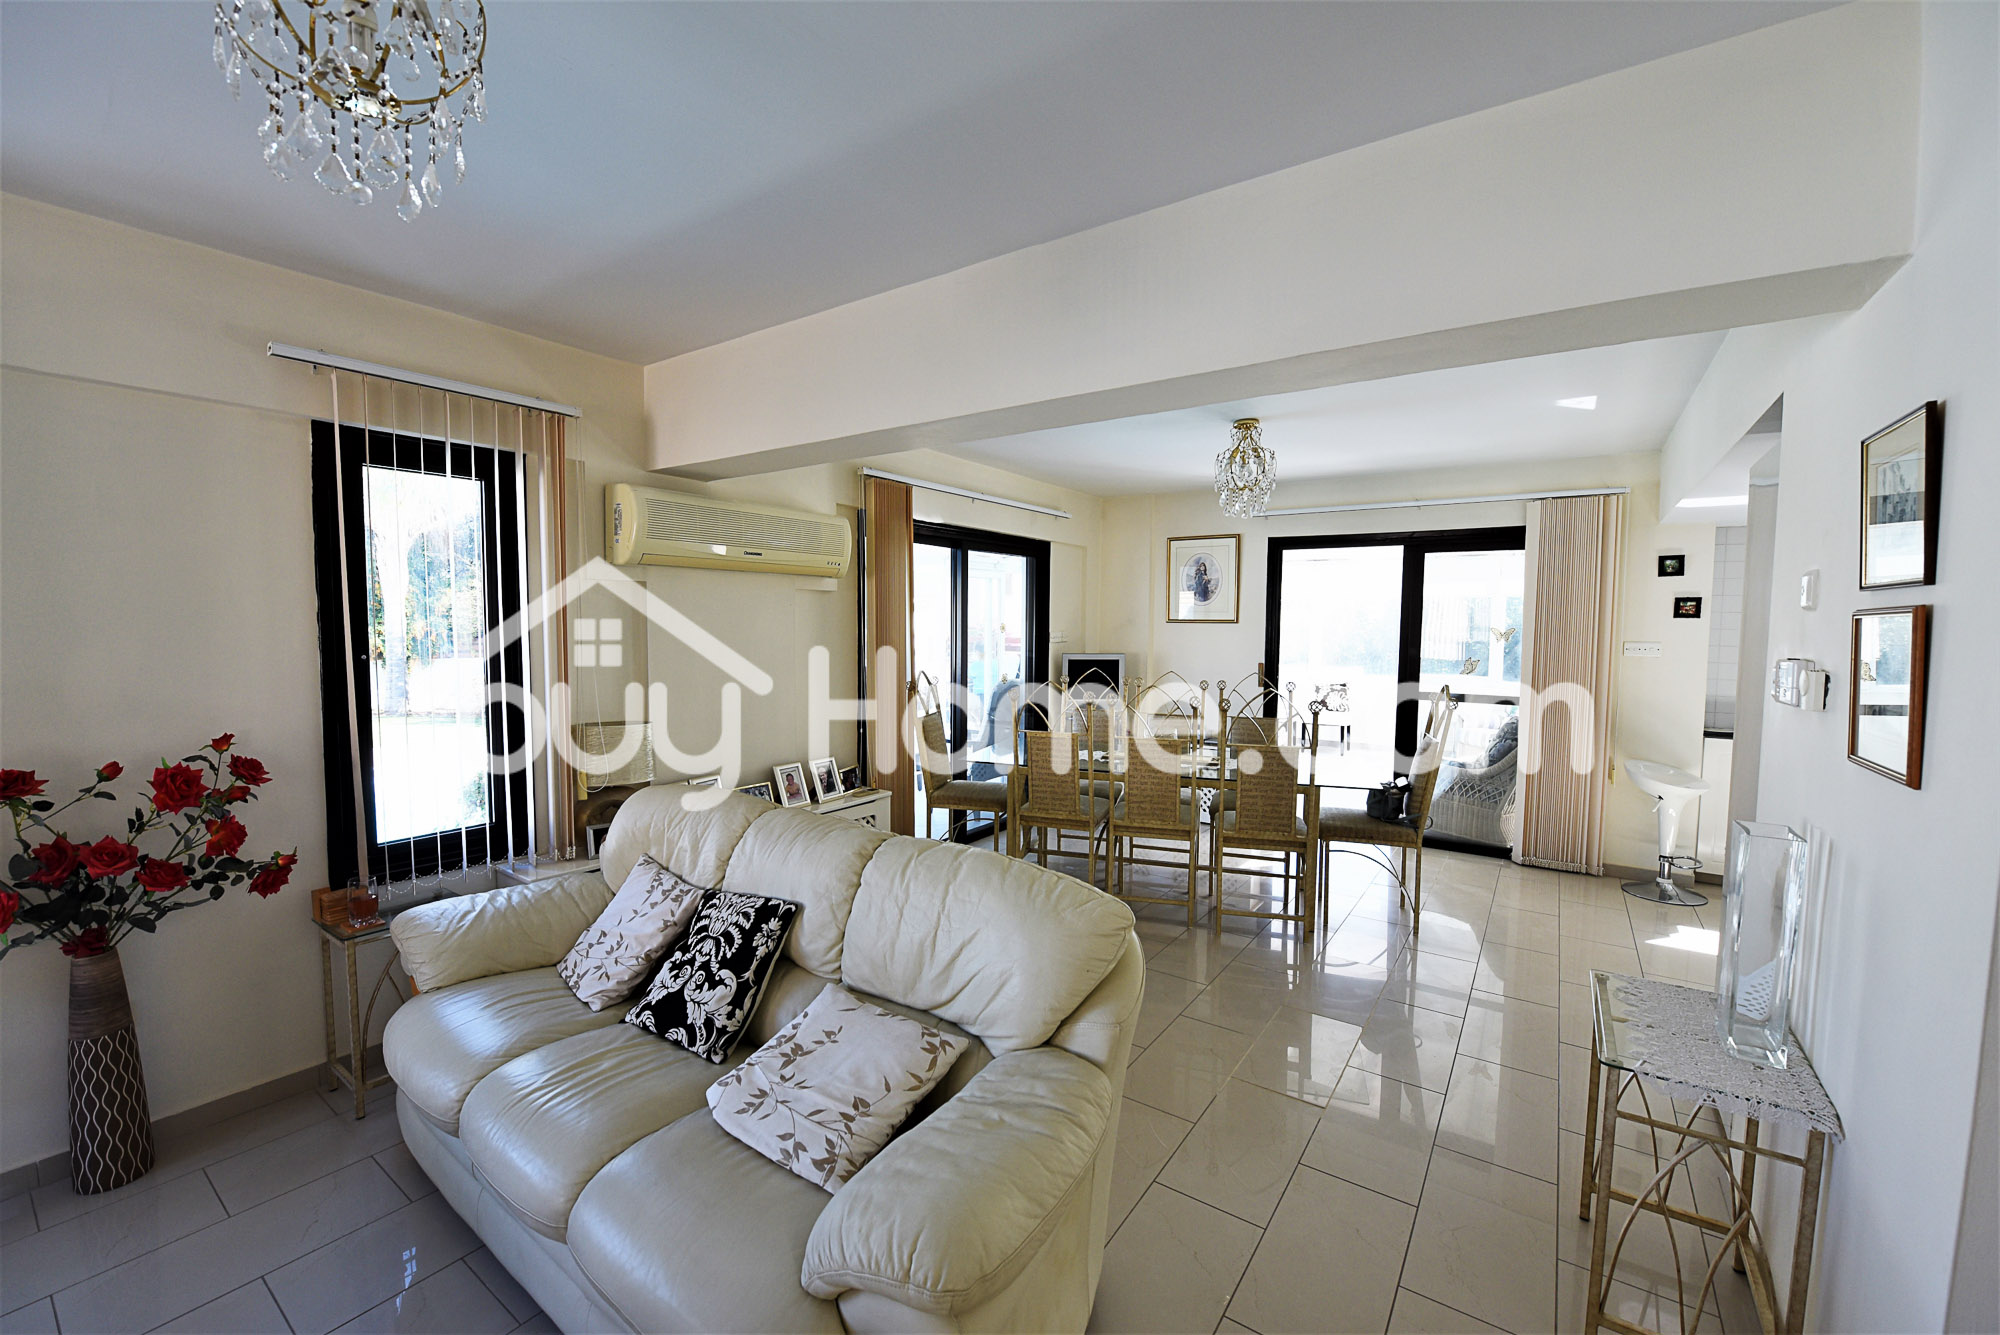 Lovely 3 Bedroom House with Pool | BuyHome